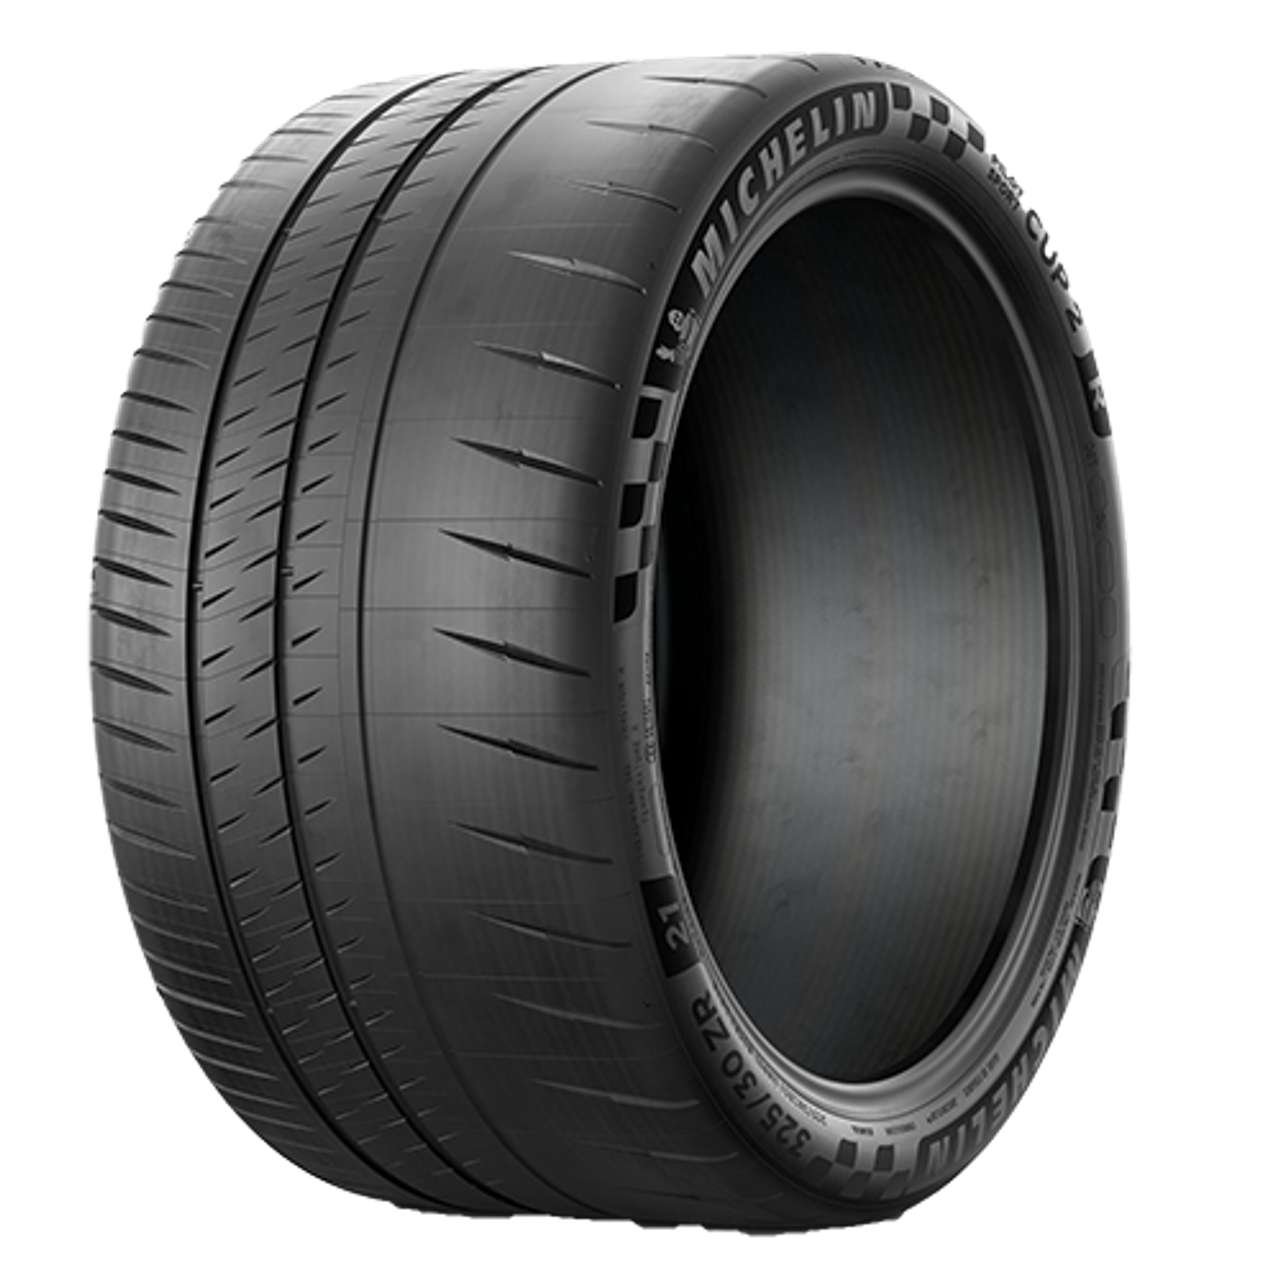 MICHELIN PILOT SPORT CUP 2 R CONNECT (MO1) 295/30ZR21 102(Y) BSW XL